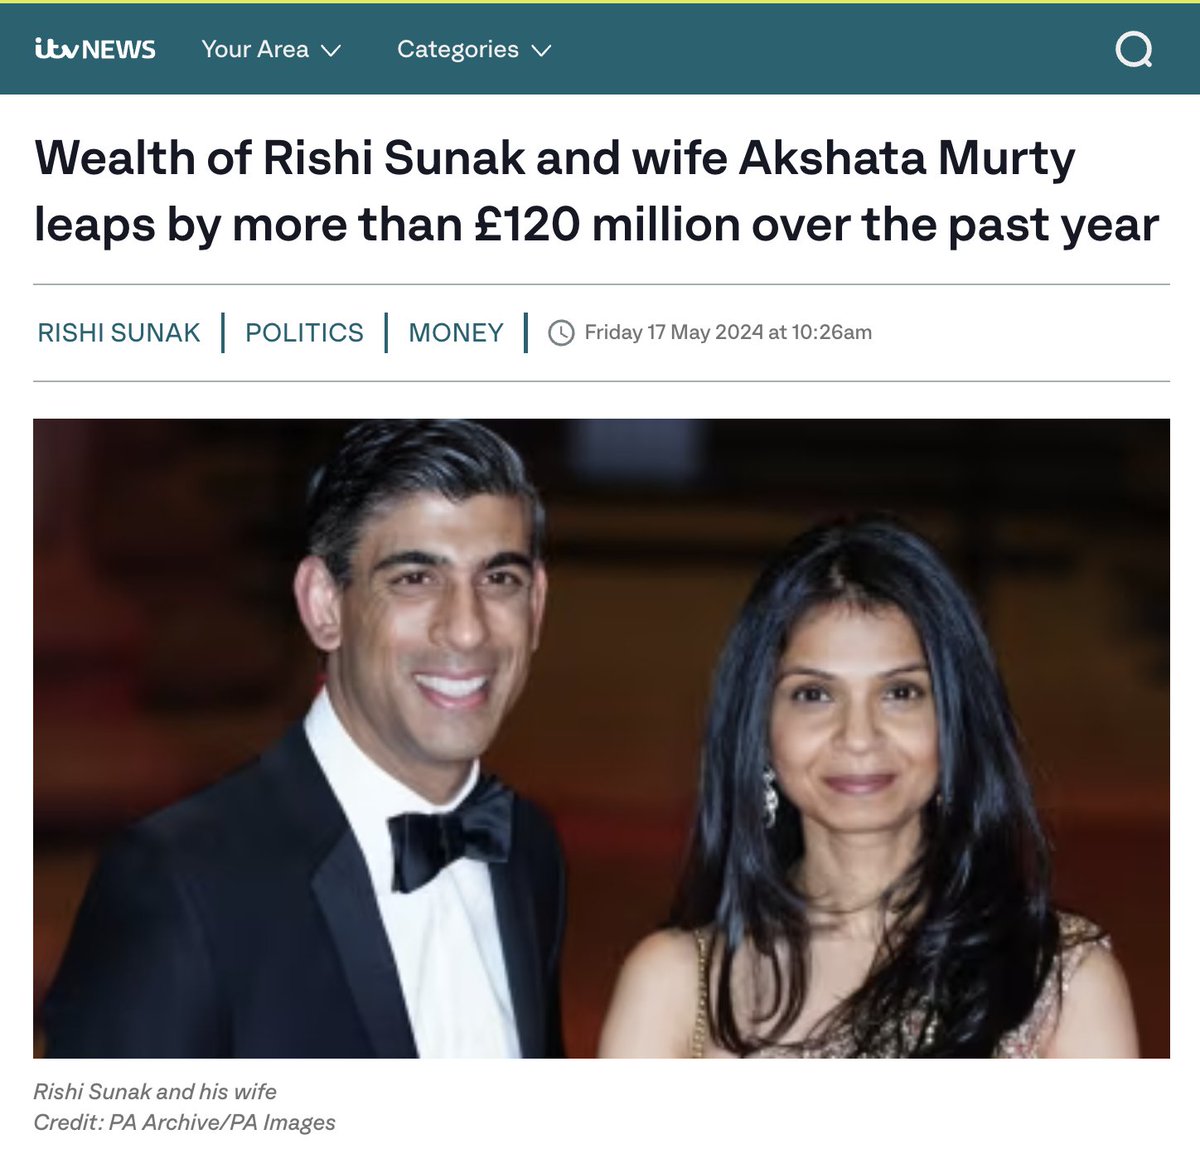 £120,000,000 - How much Rishi Sunak's family earned in the past year £8,814 - Basic state pension pic.x.com/w9mdmboo07